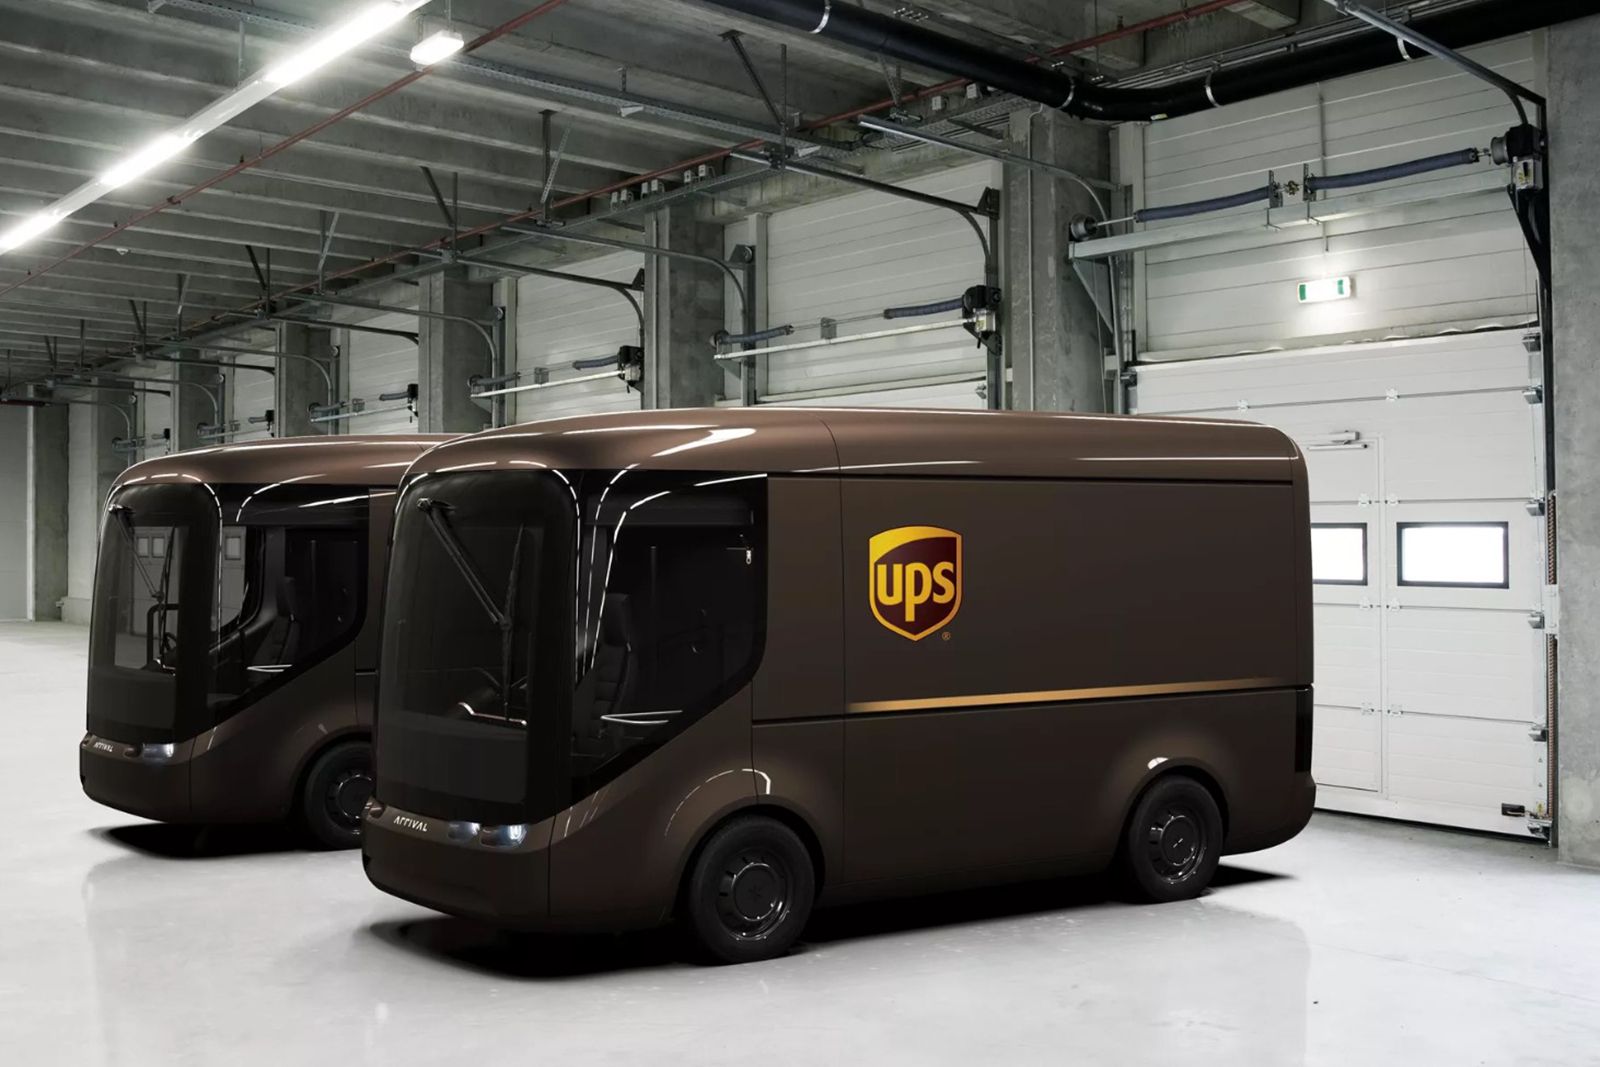 UPS will test these futuristic electric trucks in London this year image 1